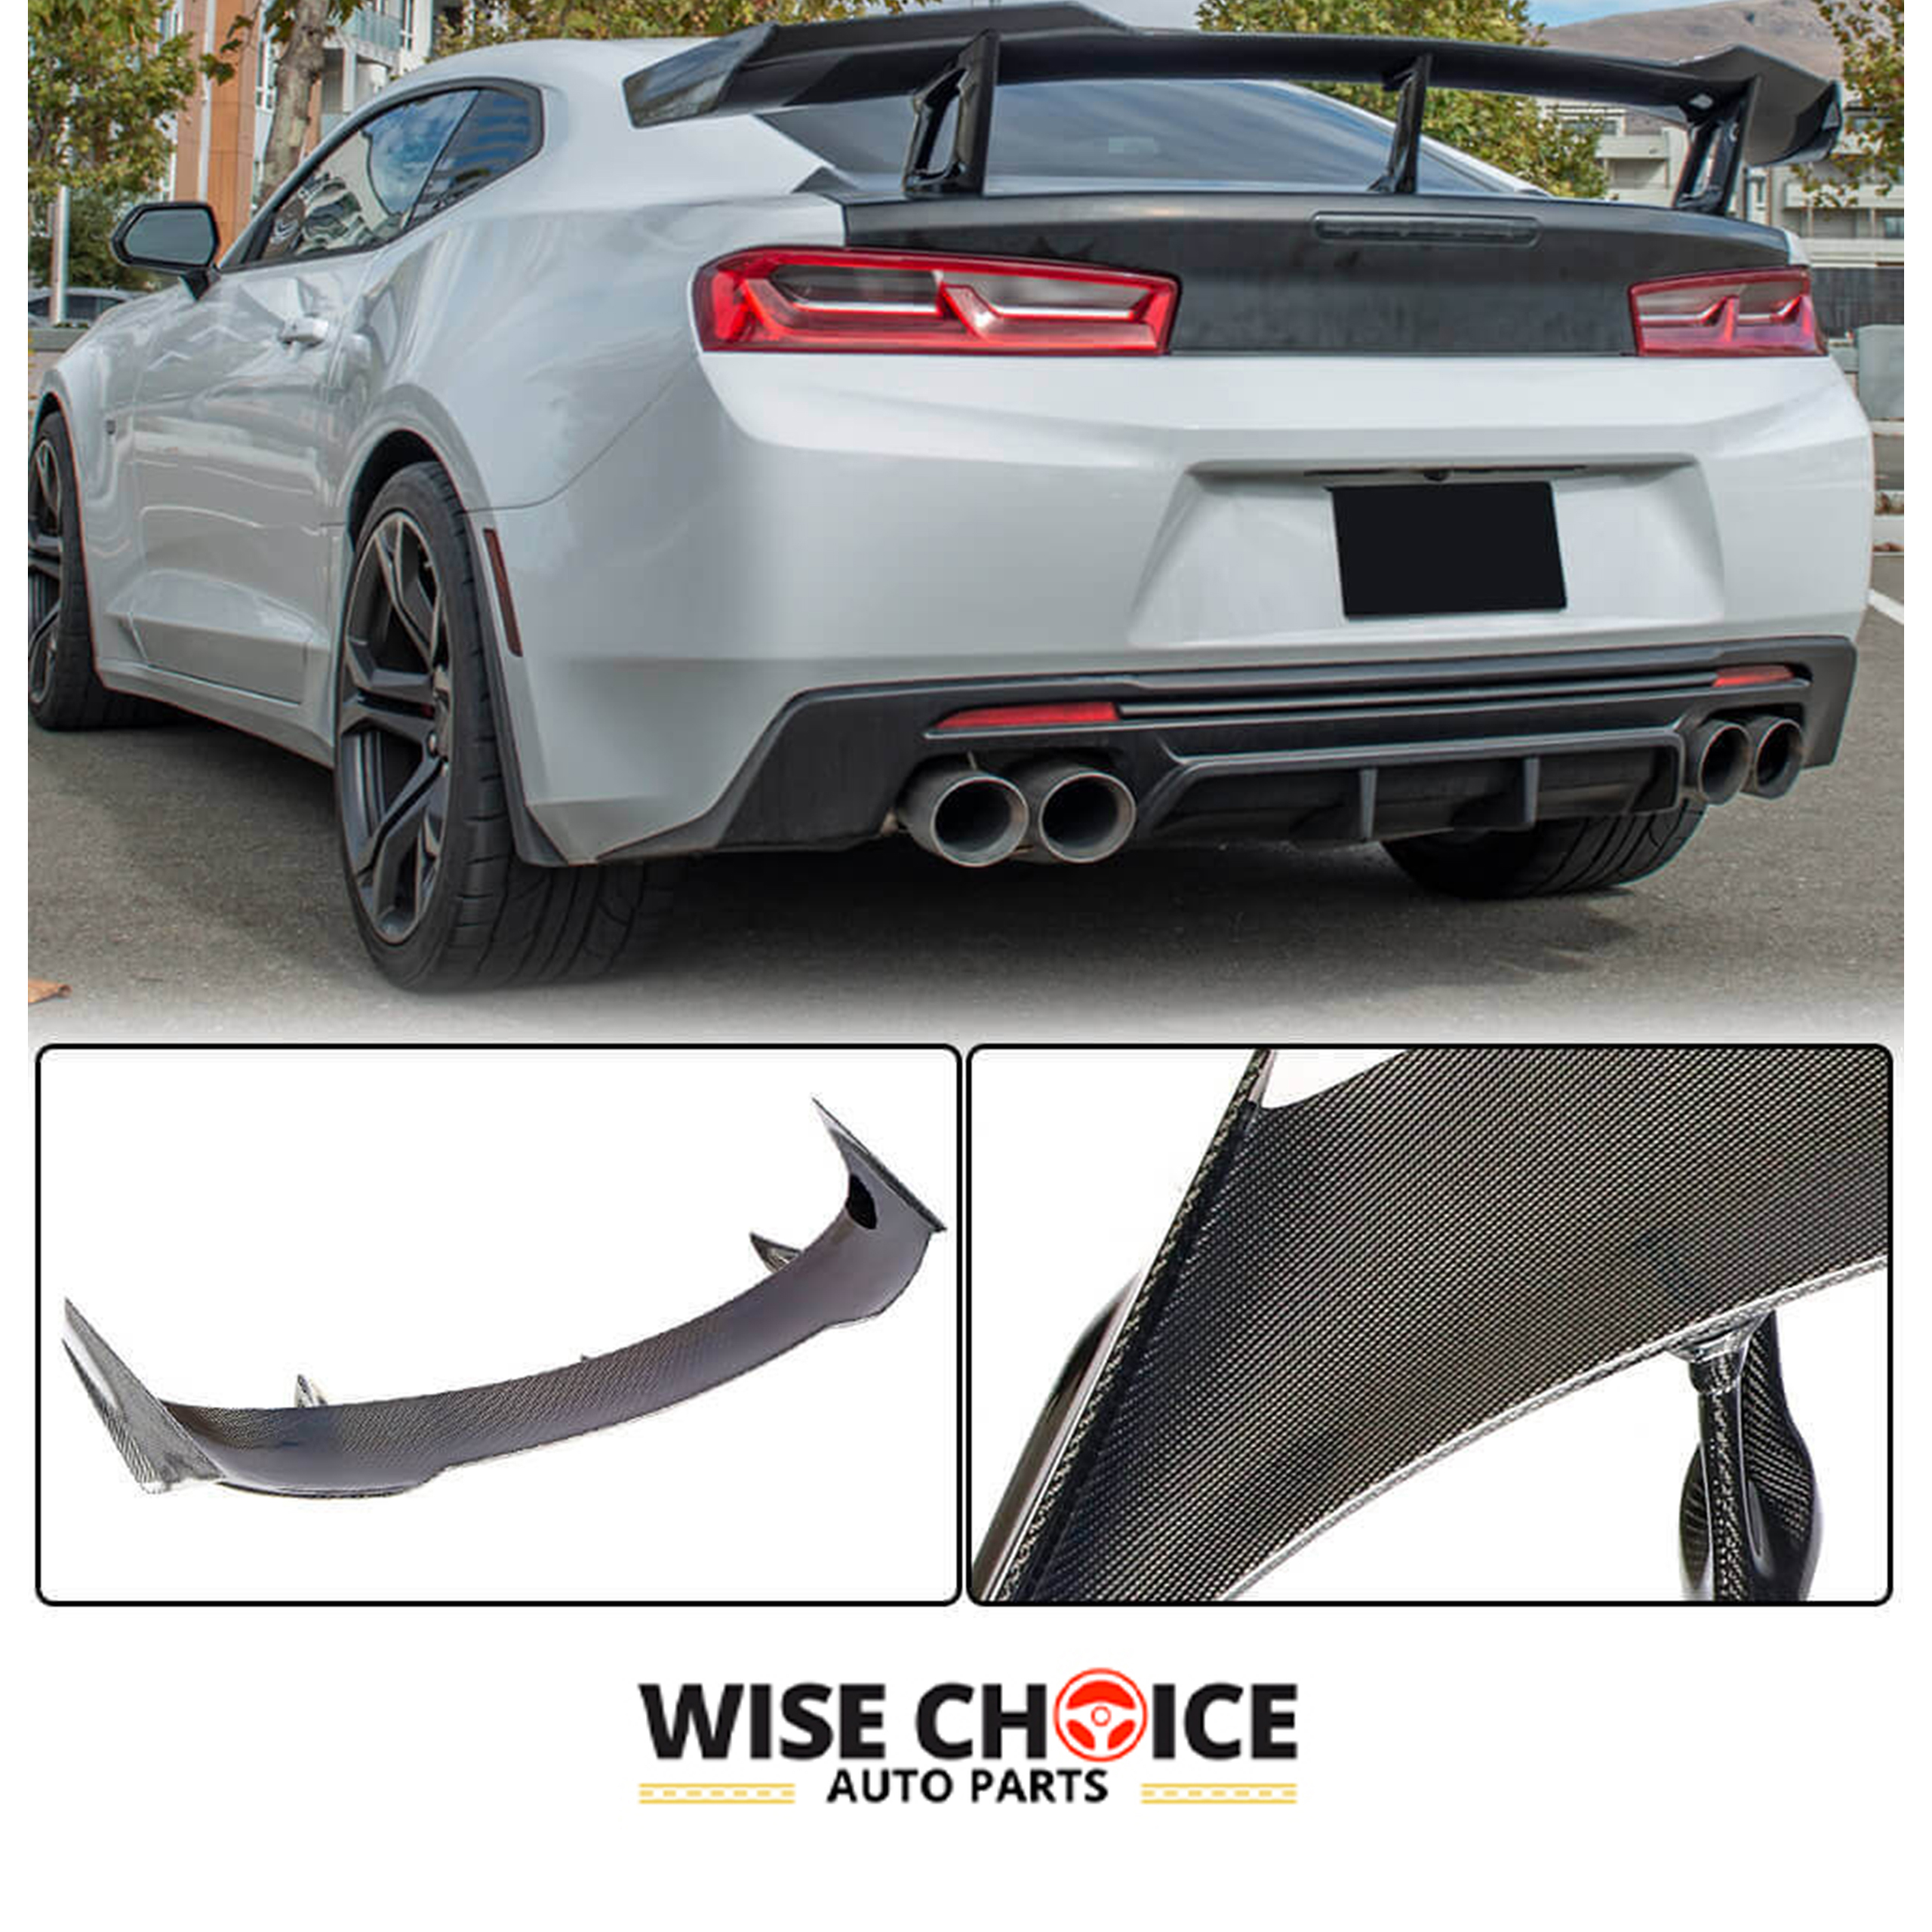 2016-2022 Chevy Camaro Coupe Carbon Fiber Rear Wing Spoiler - Enhance Performance and Style